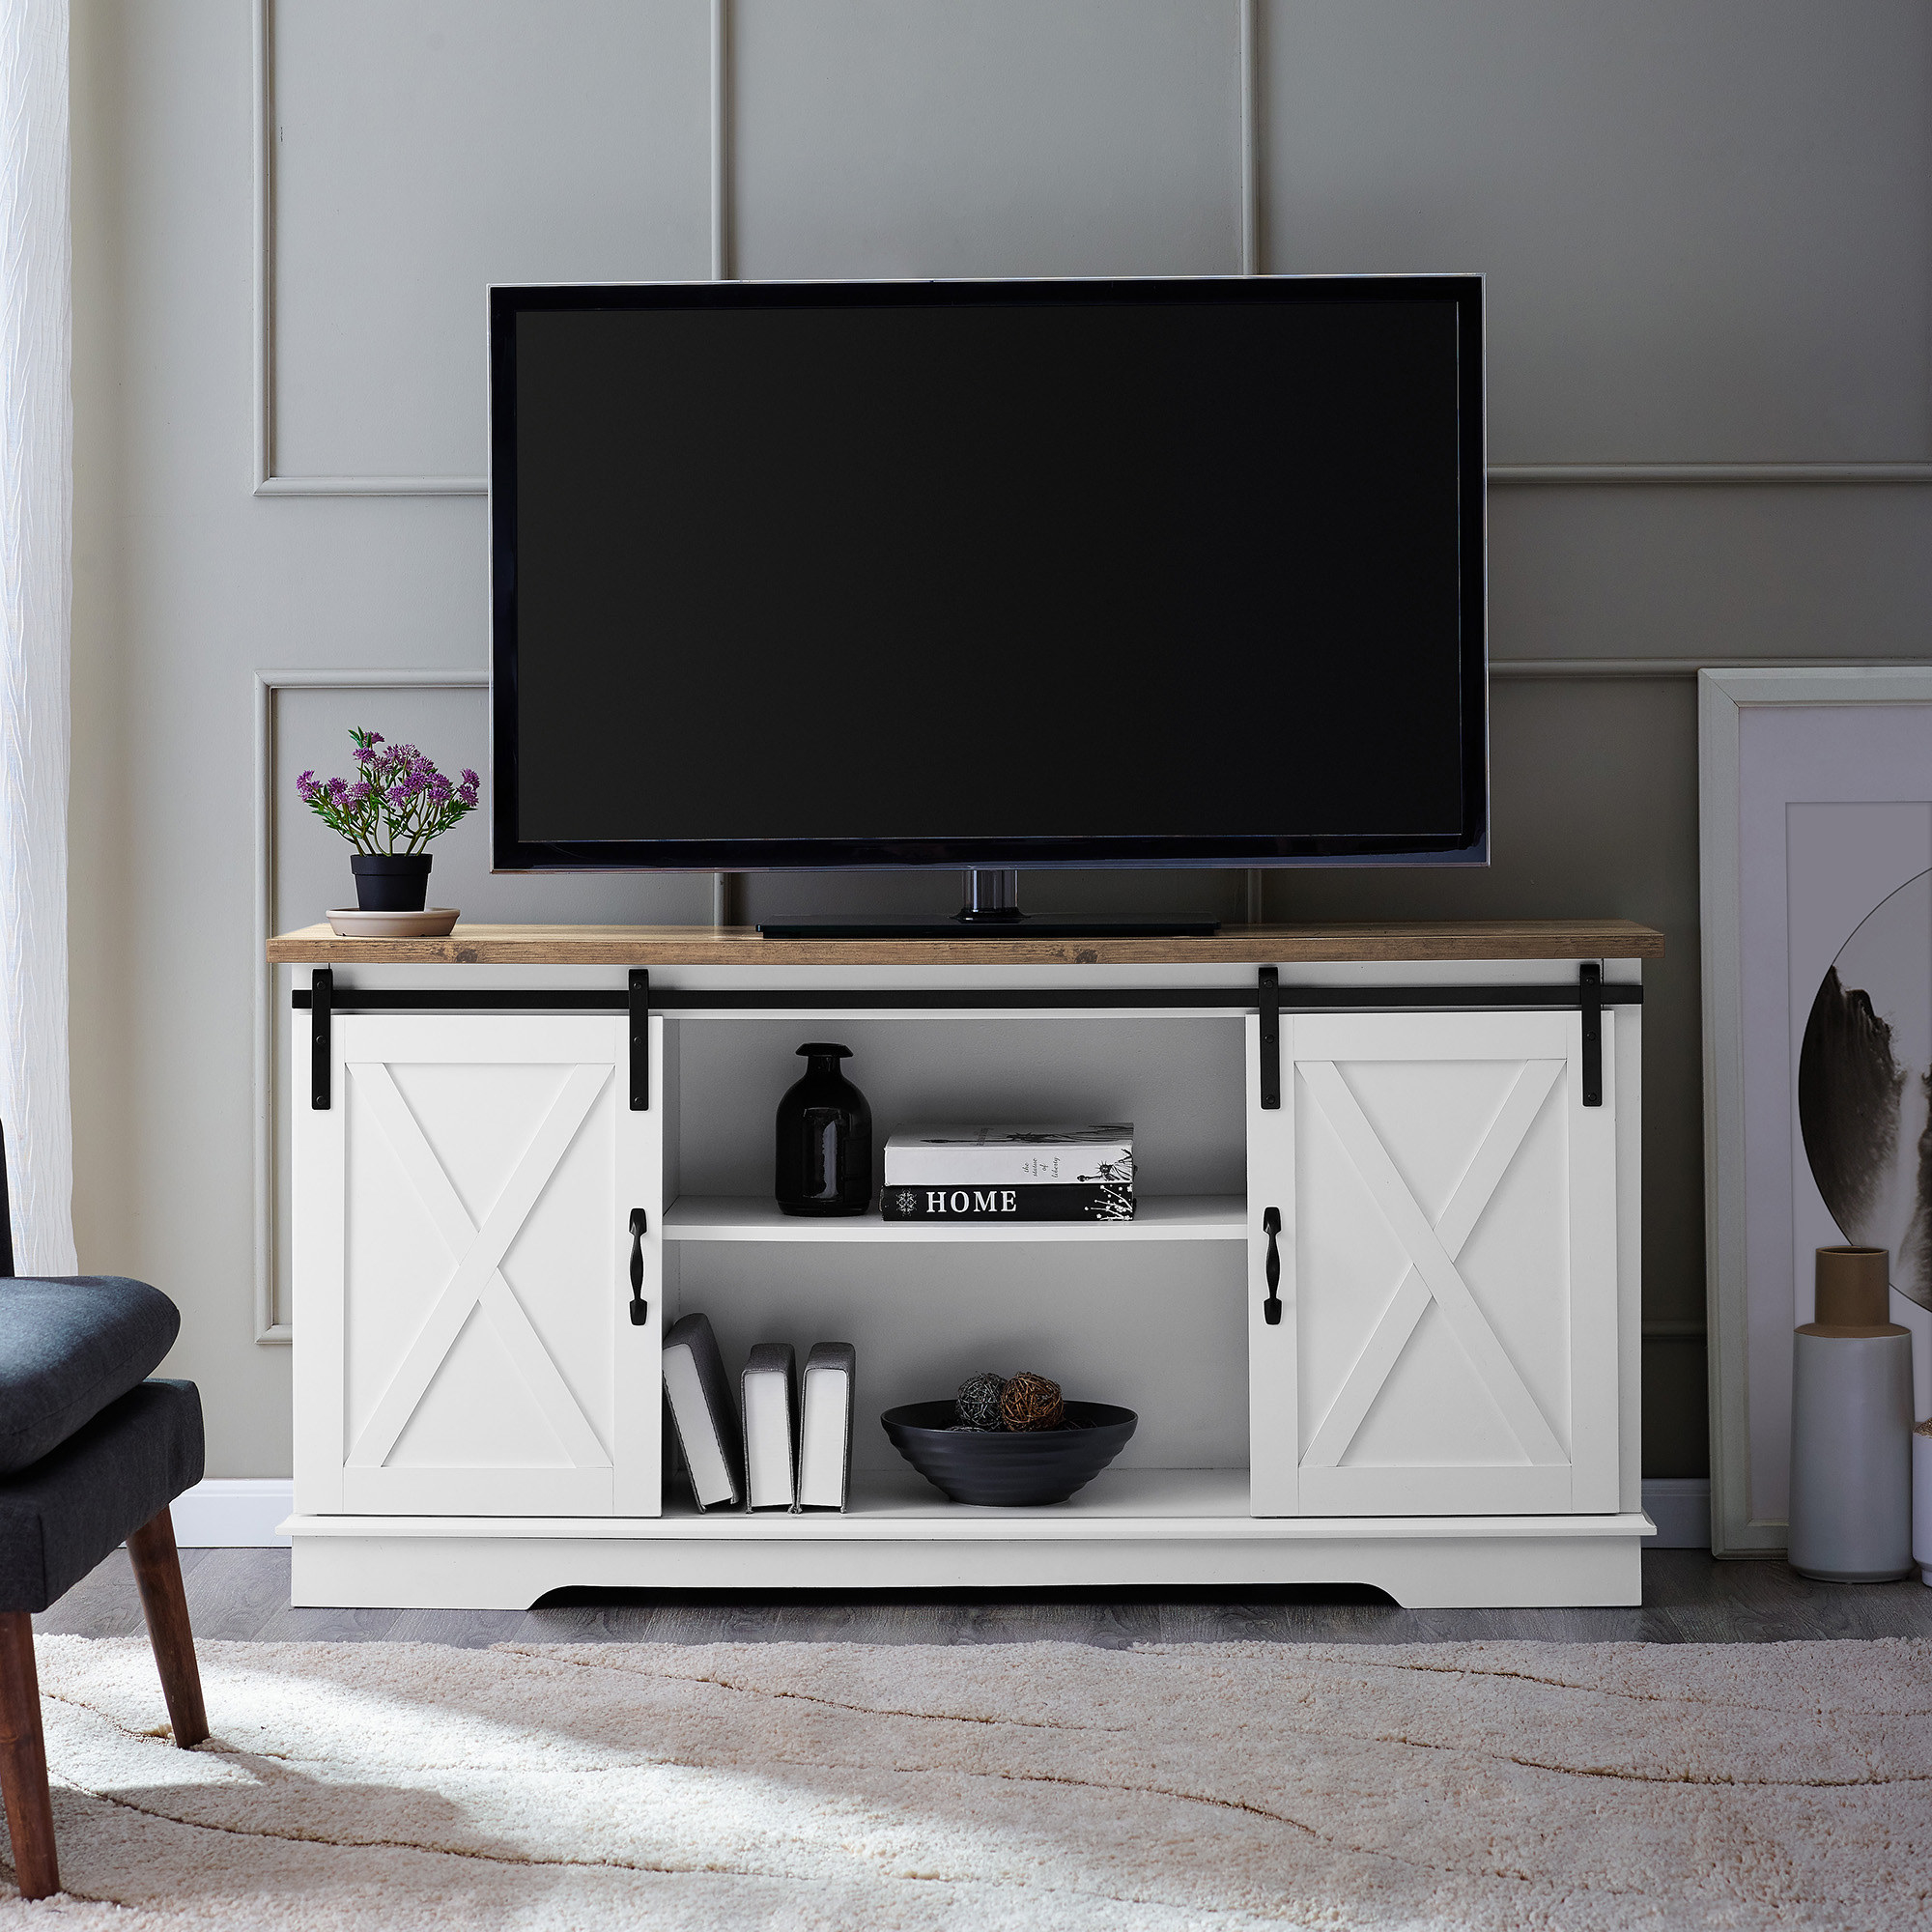 white barn door tv stand with TV on top of it